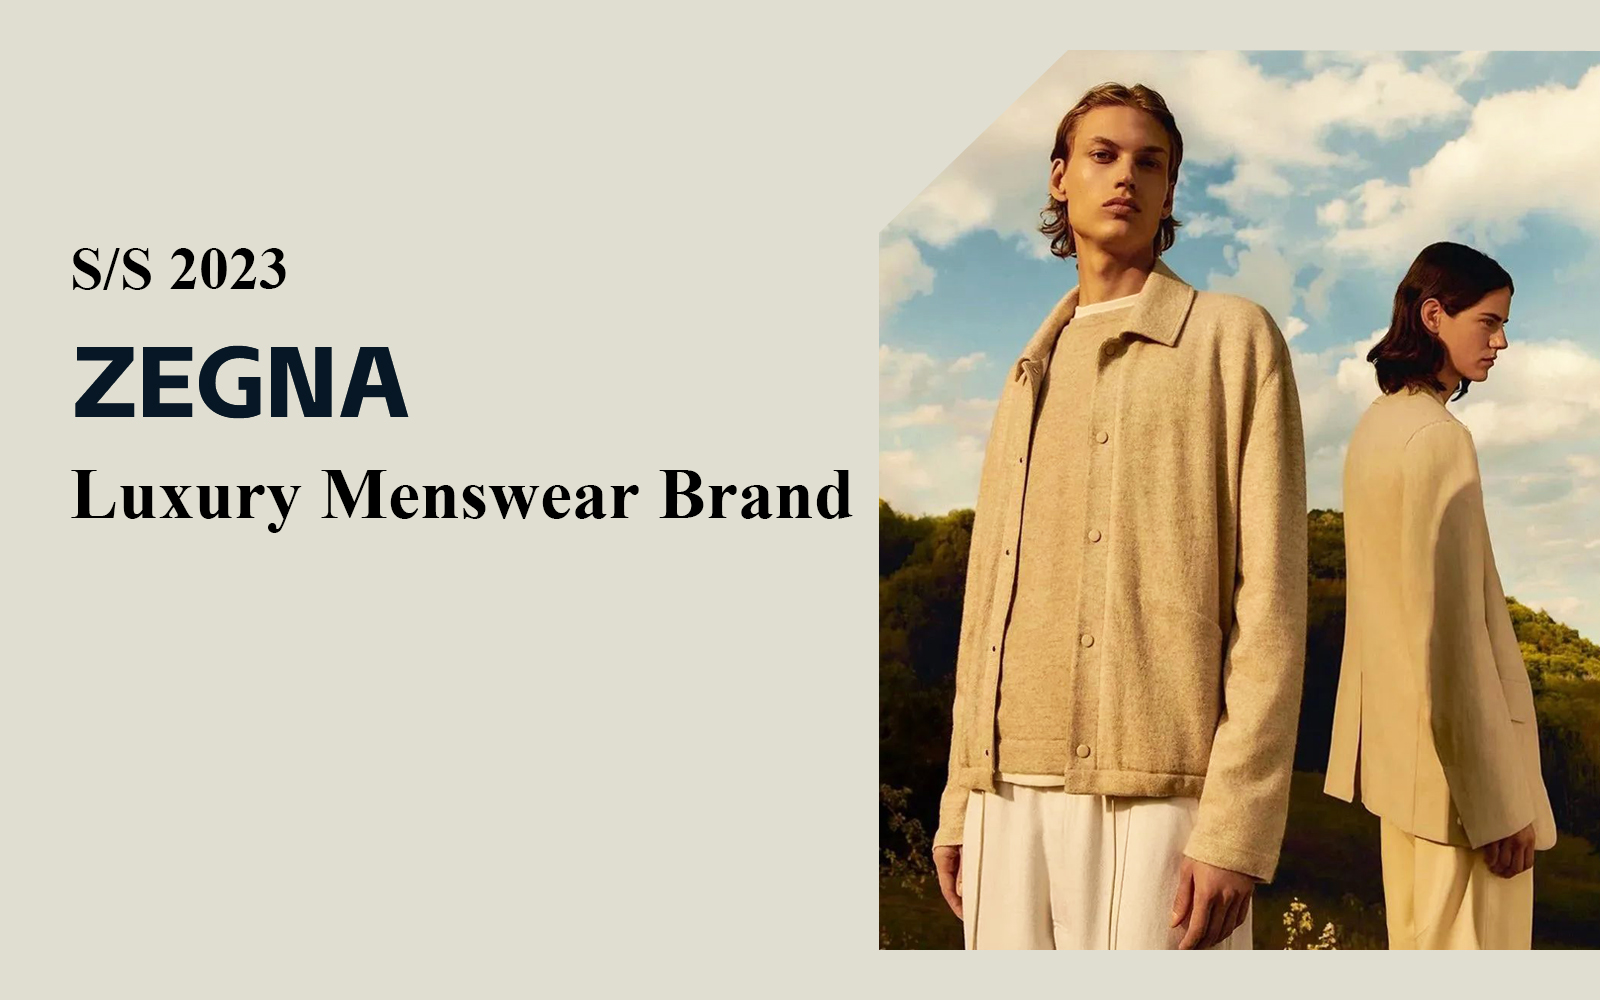 Endless Outdoors -- The Analysis of ZEGNA The Luxury Menswear Brand